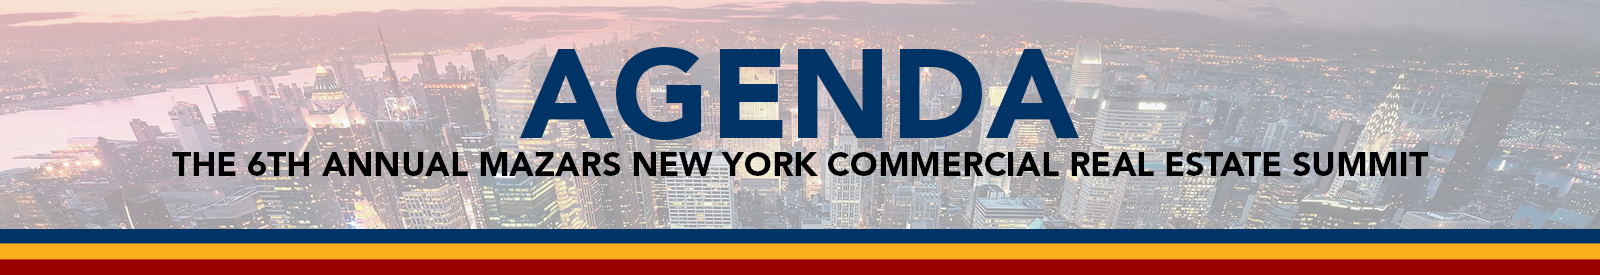 NYCRES-Top-Banners-Agenda-V2